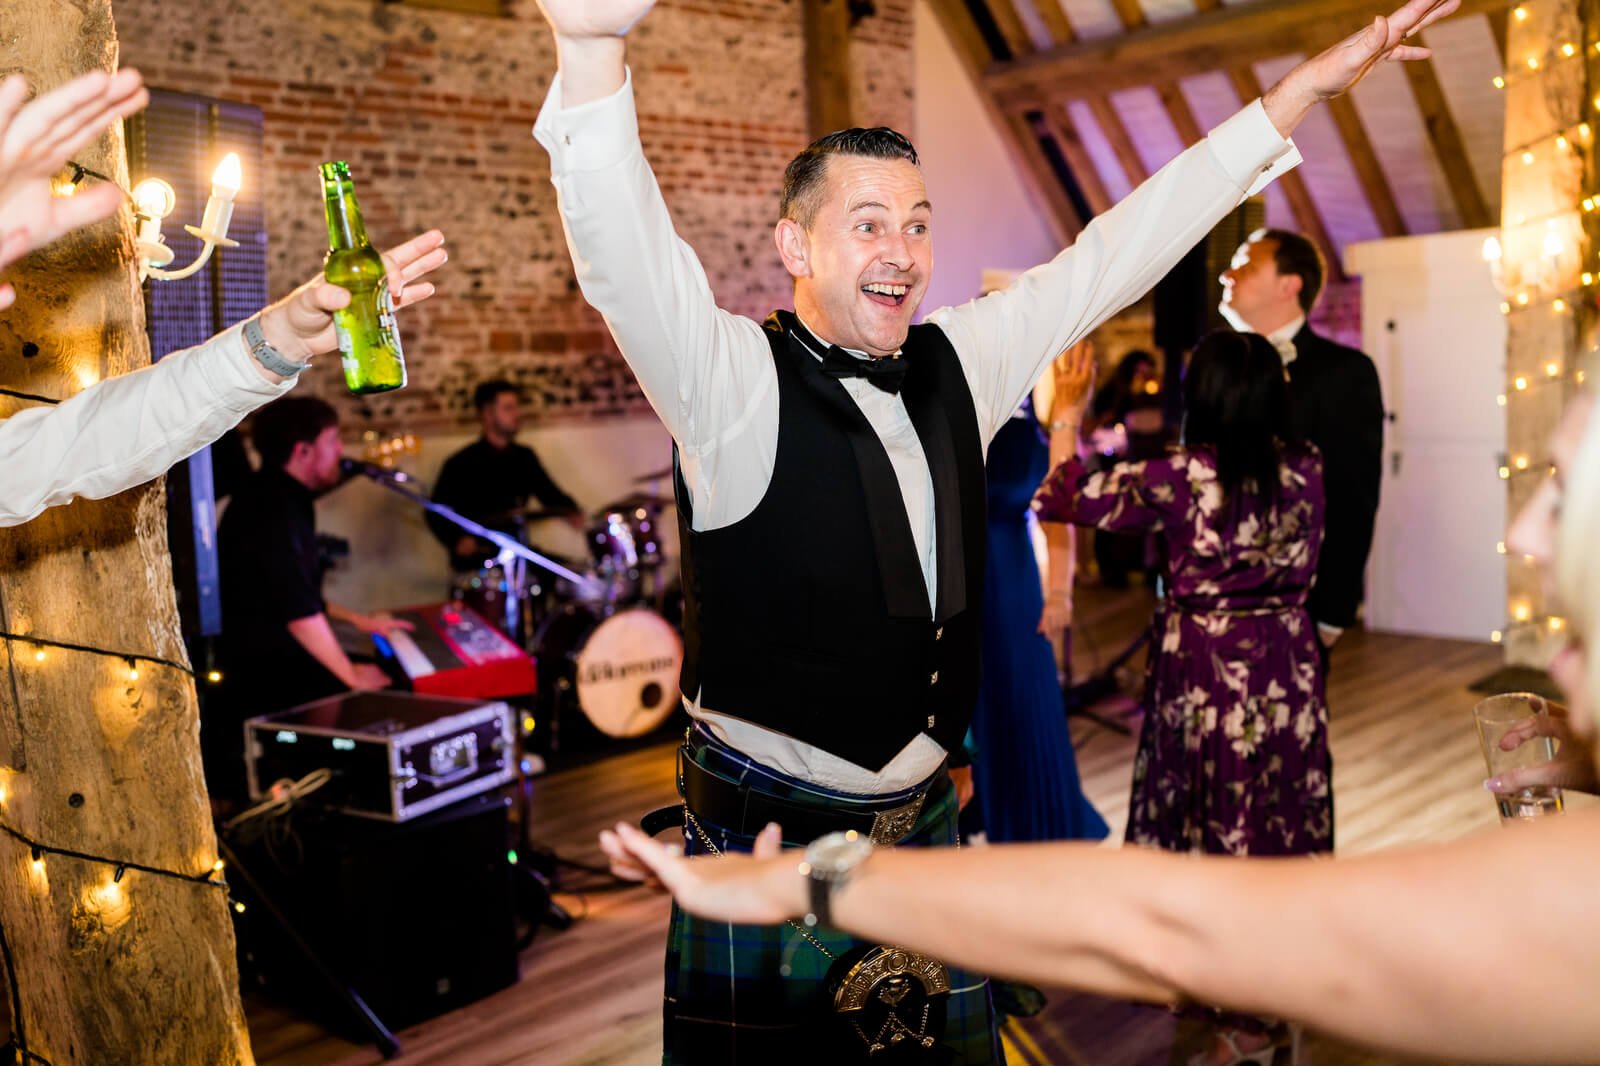 guests dancing at barford park wedding venue with band the deloreons